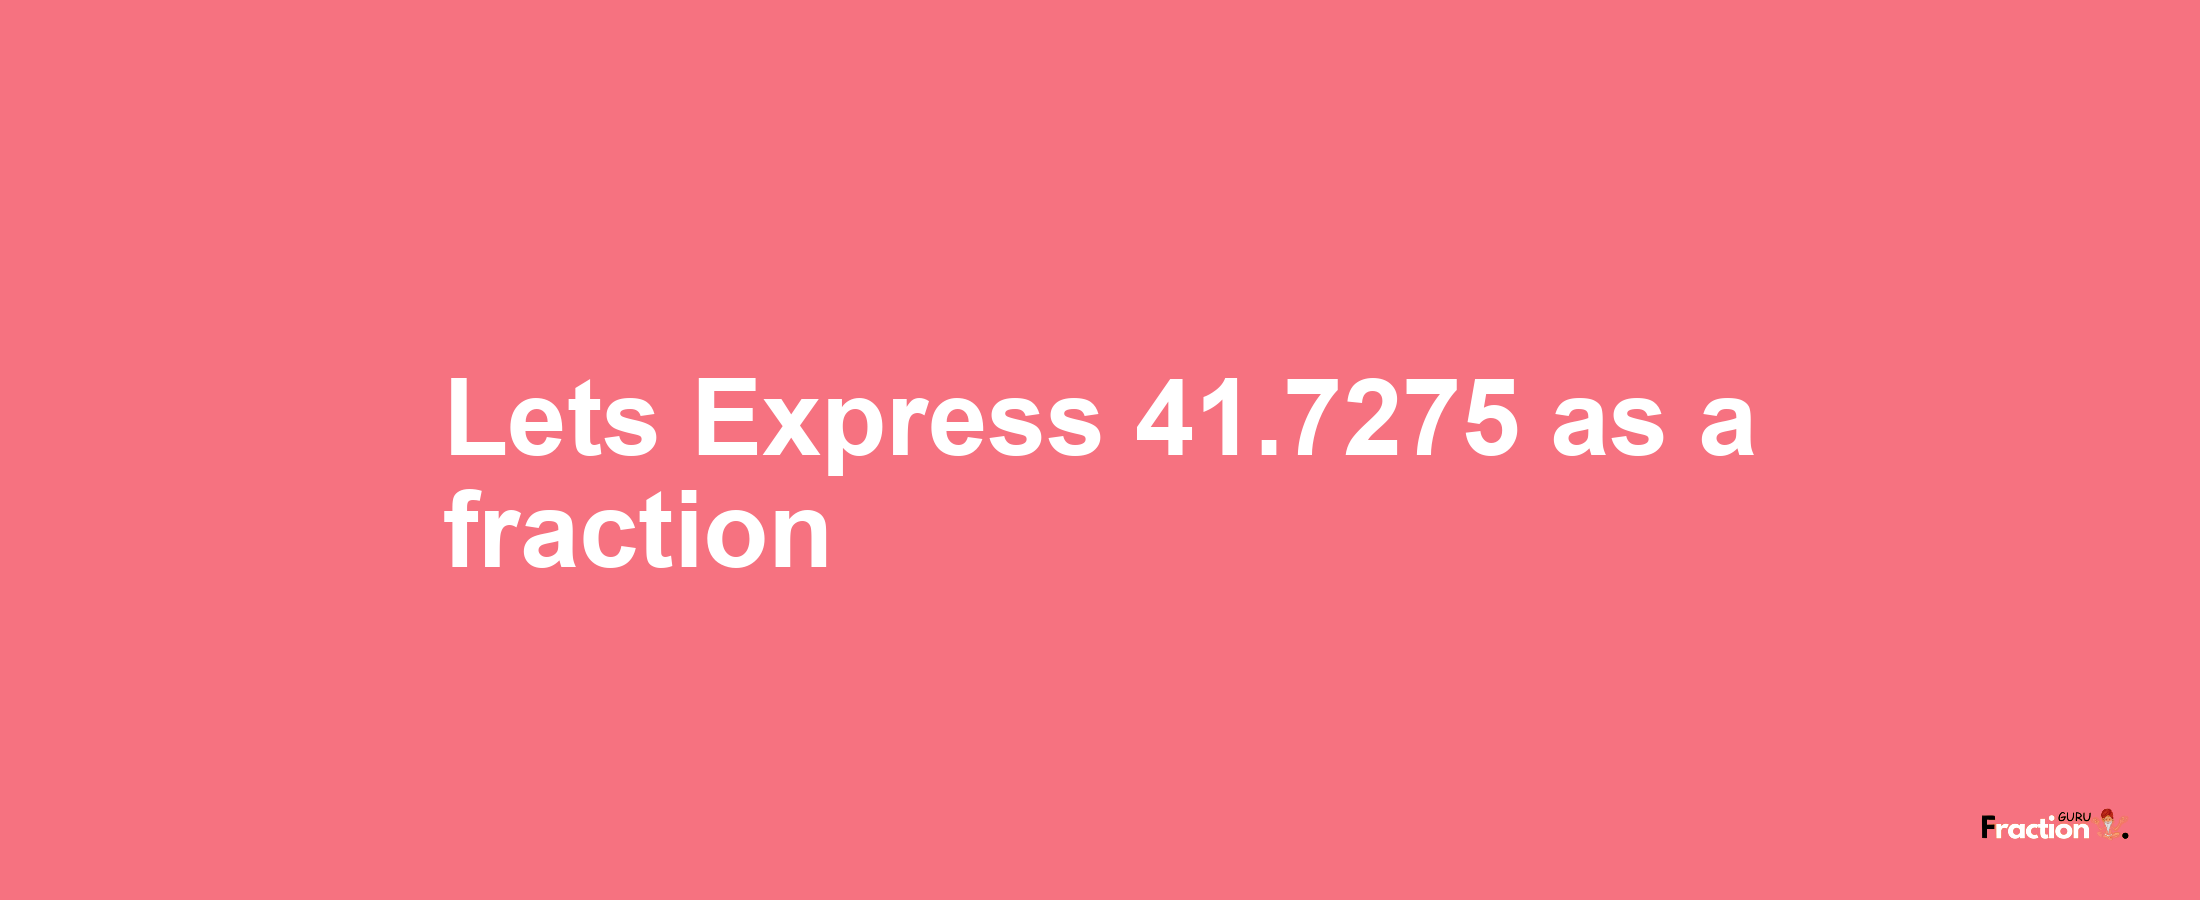 Lets Express 41.7275 as afraction